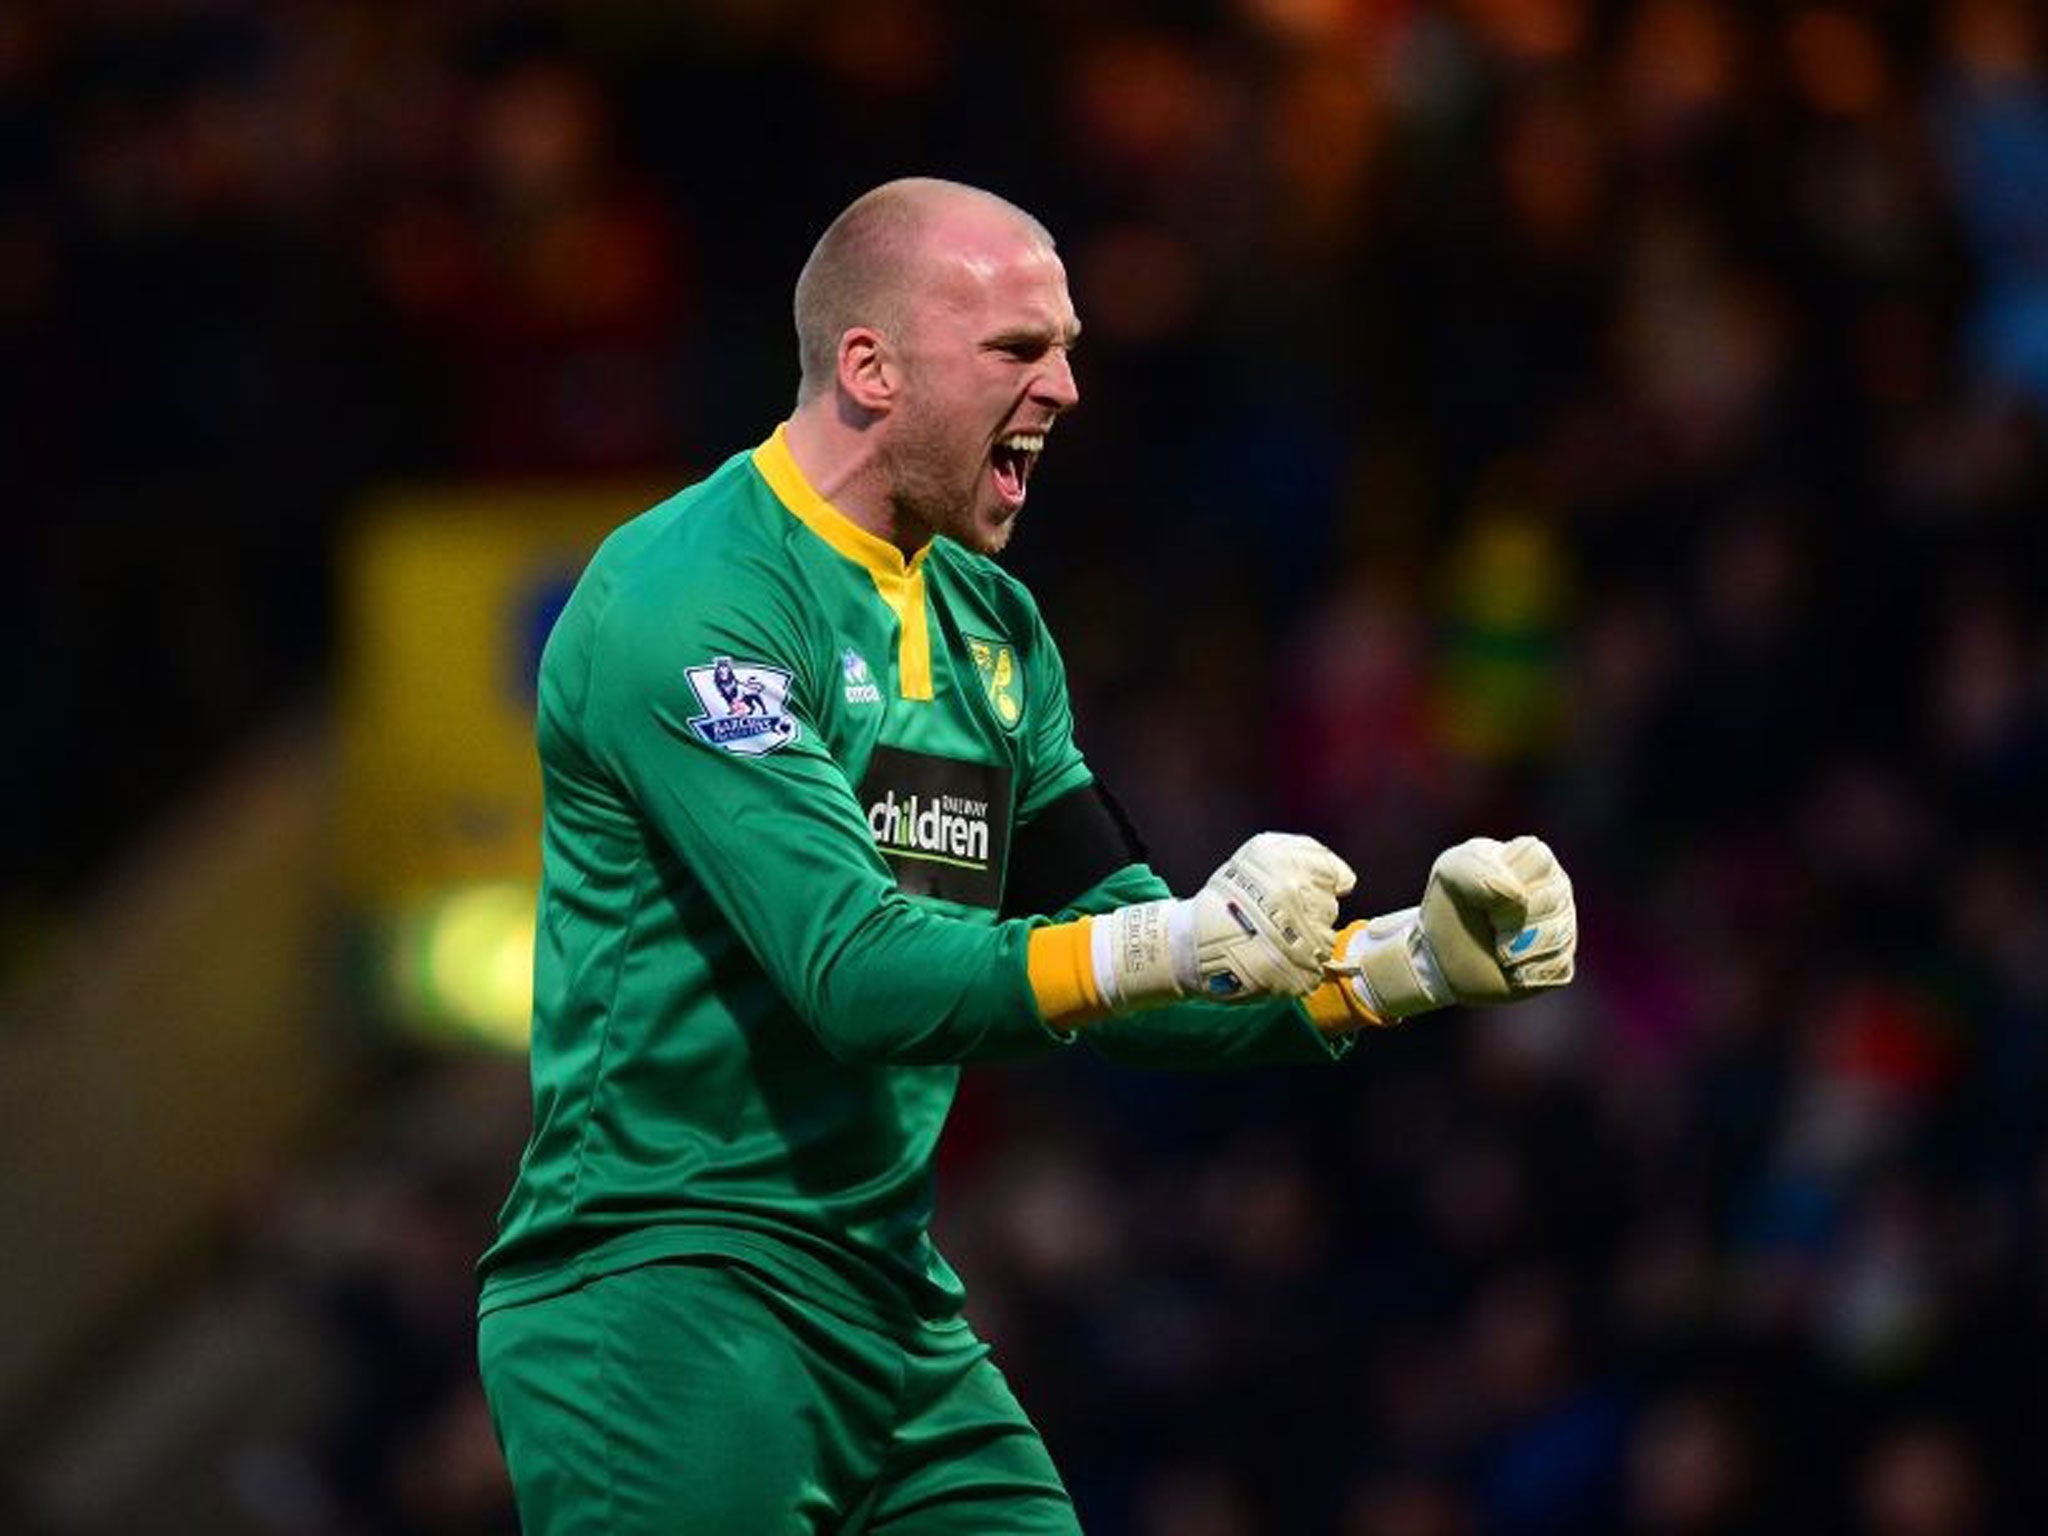 Raise the bar: John Ruddy has taken the place of his England rival Fraser Forster at Norwich and reckons he plays at a higher level